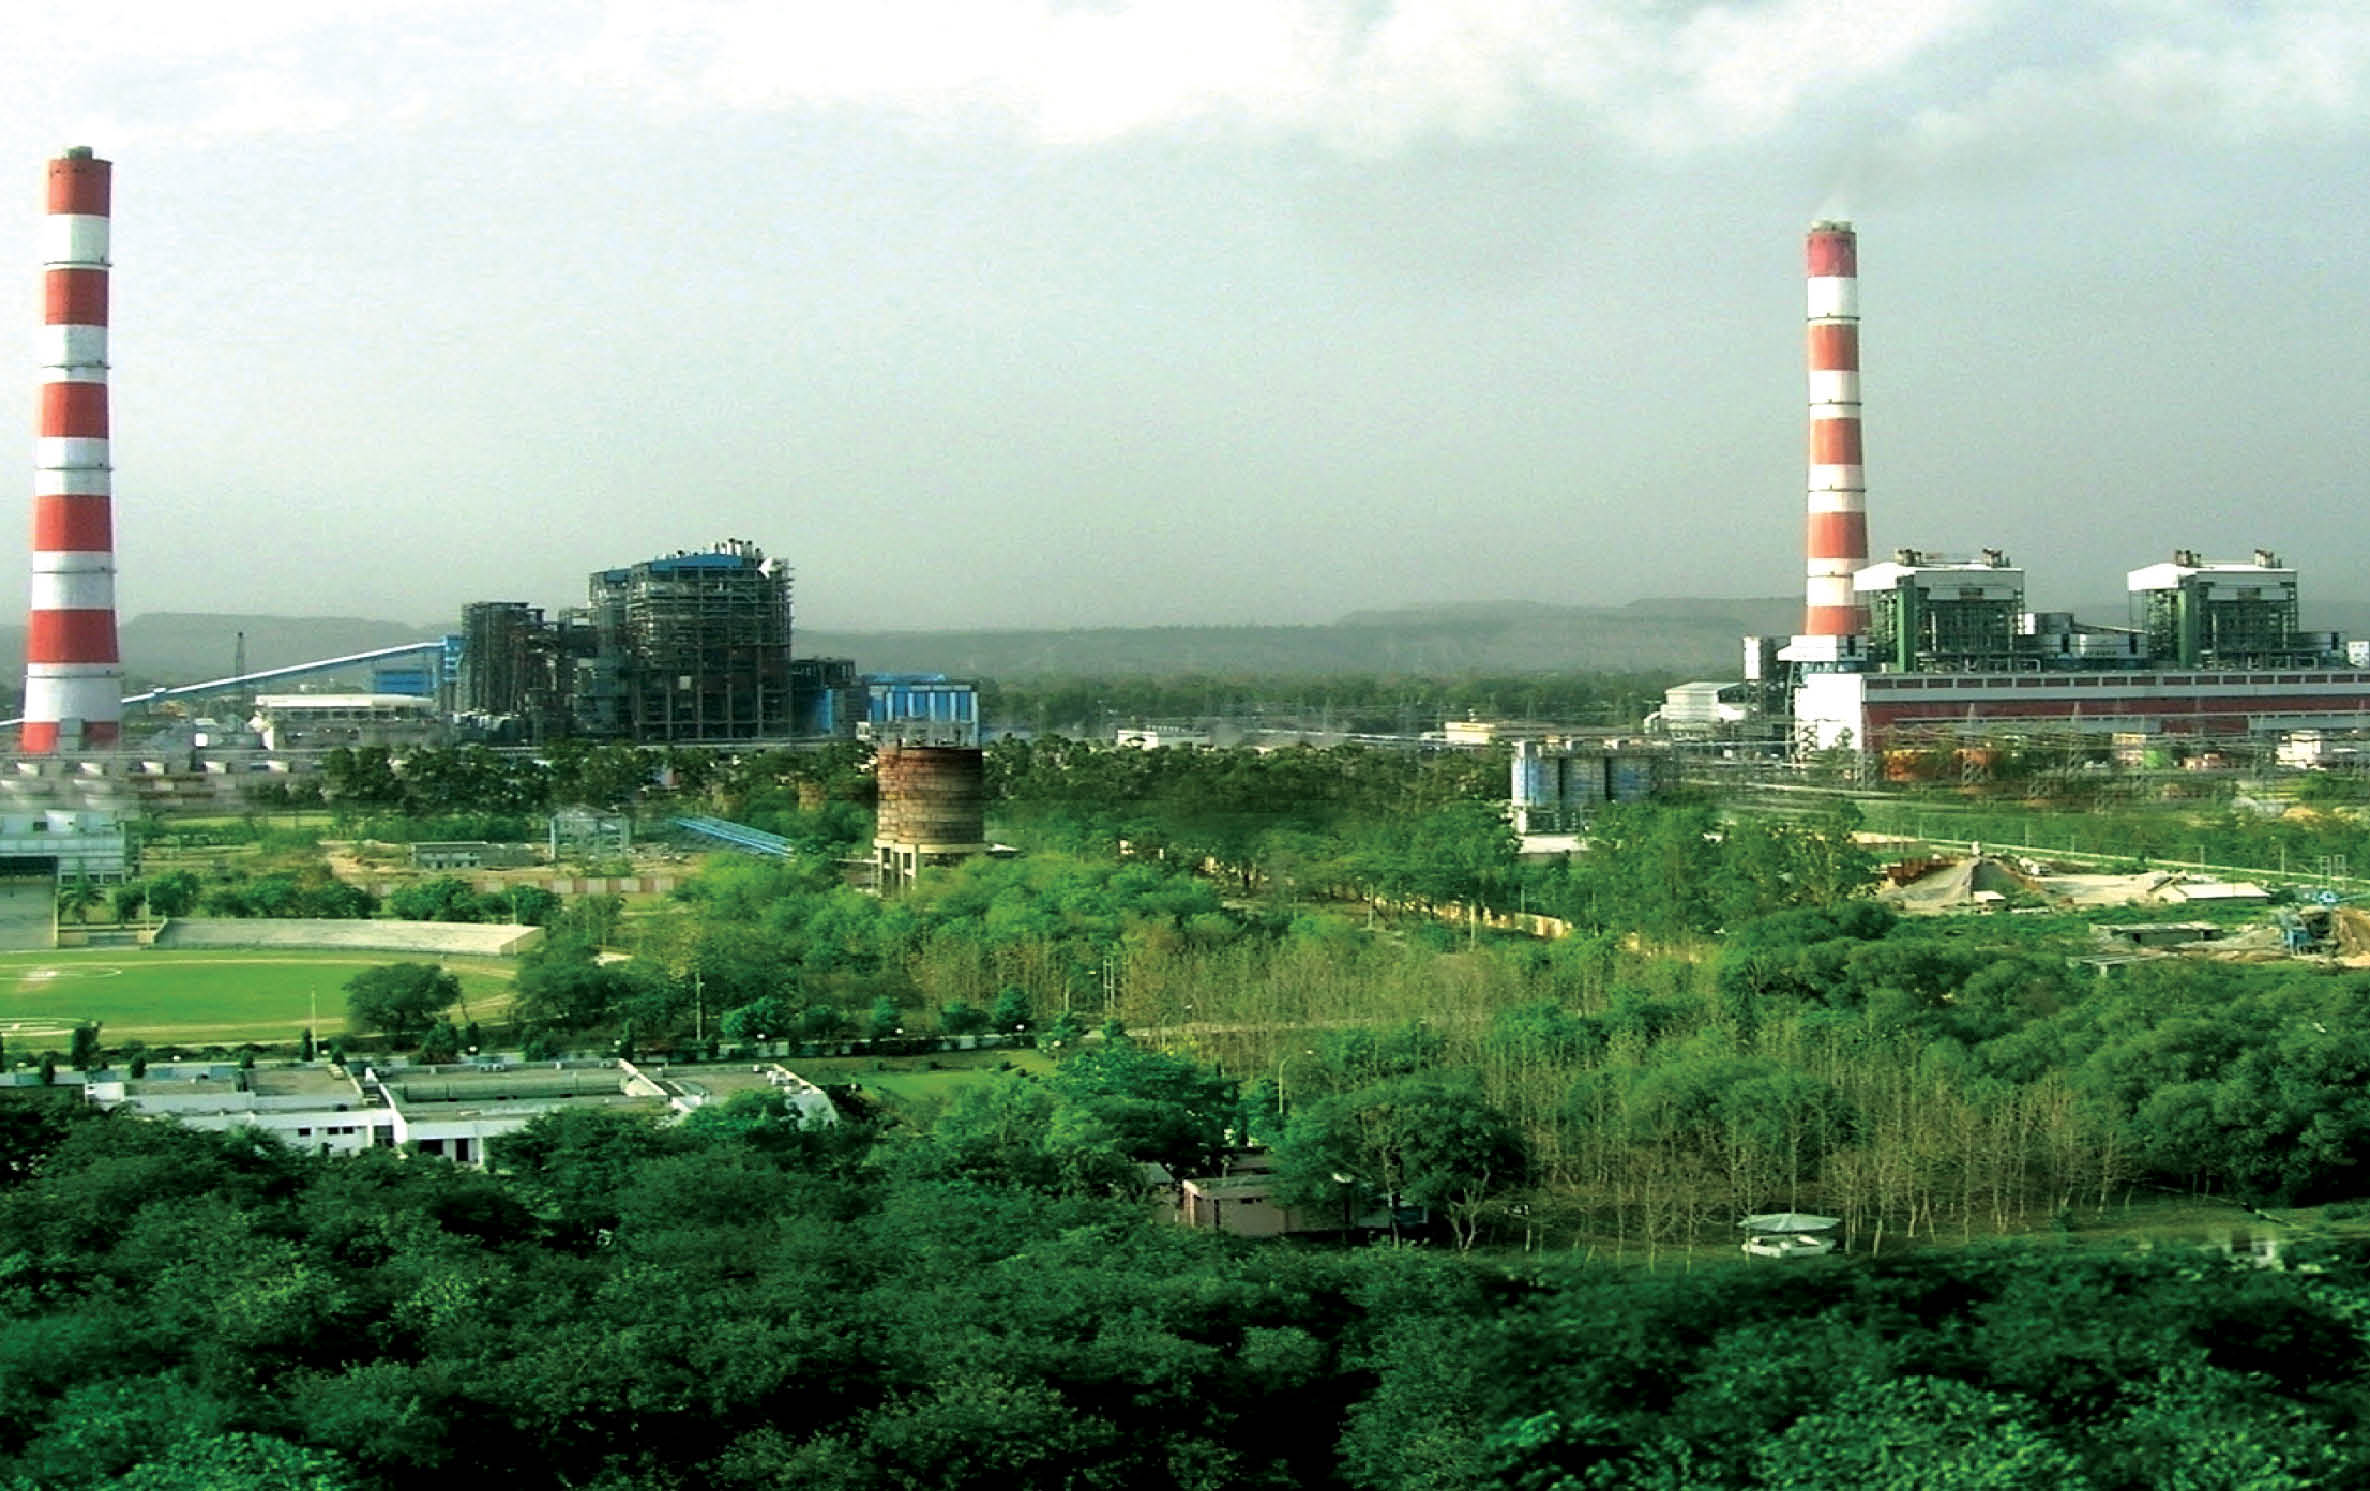 NTPC: Powering the Nation Sustainably